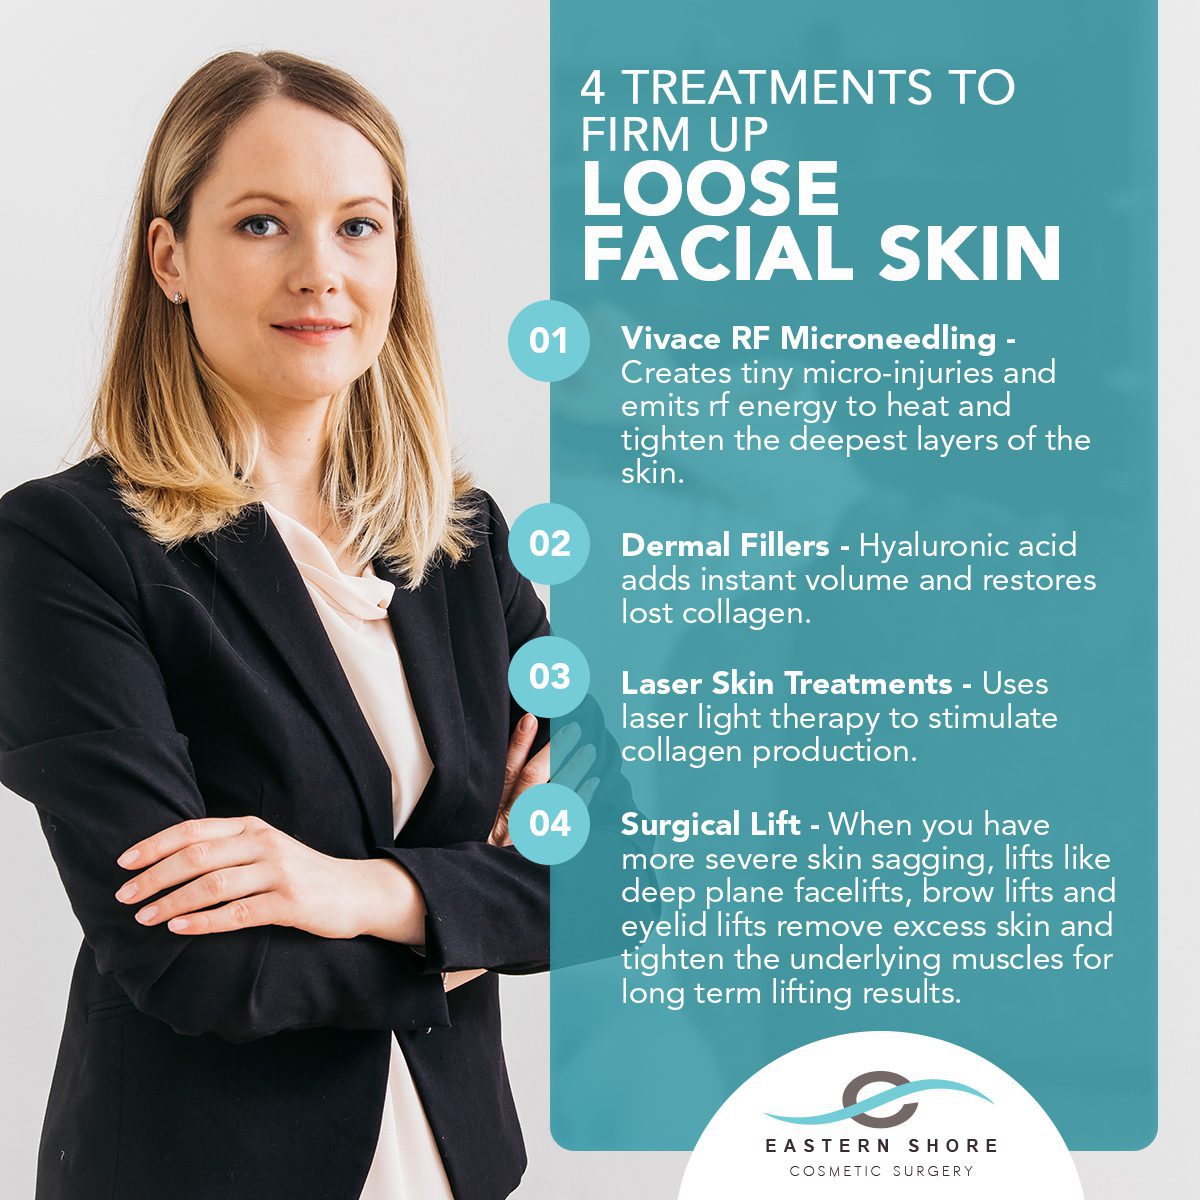 4 Treatments to Firm up Loose Facial Skin